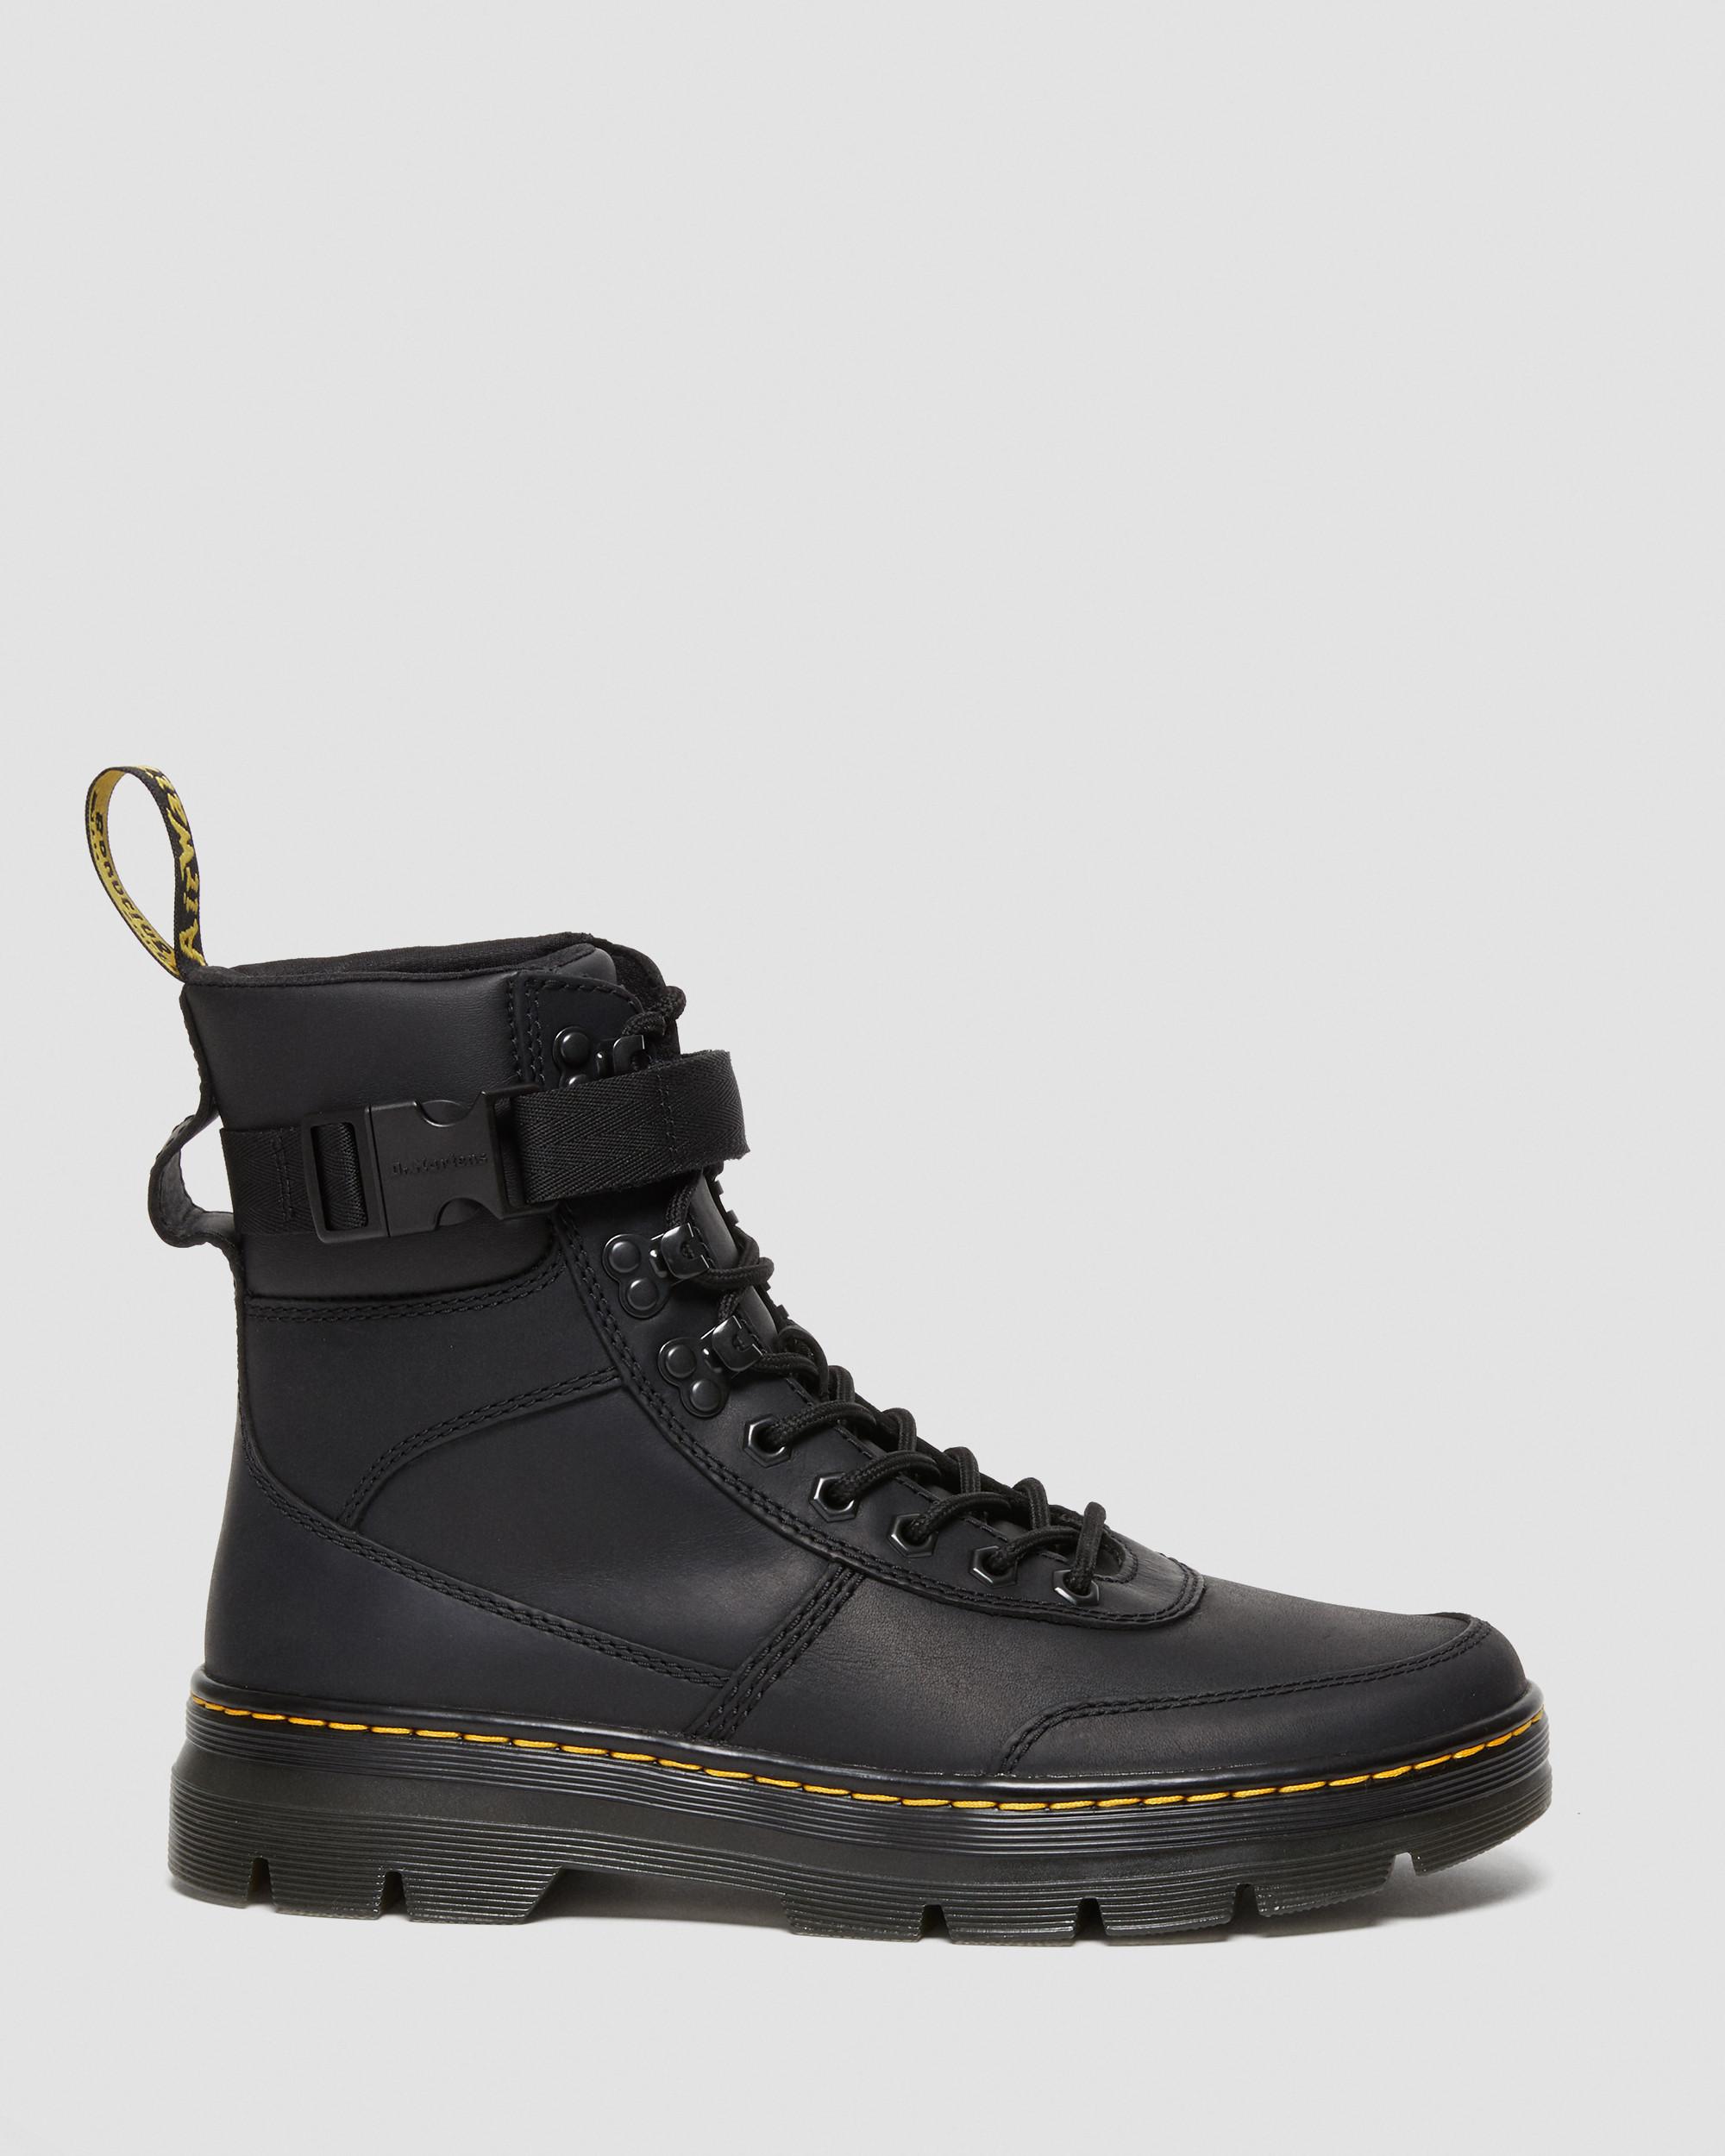 Combs Tech II Wyoming Leather Utility Boots in Black | Dr. Martens